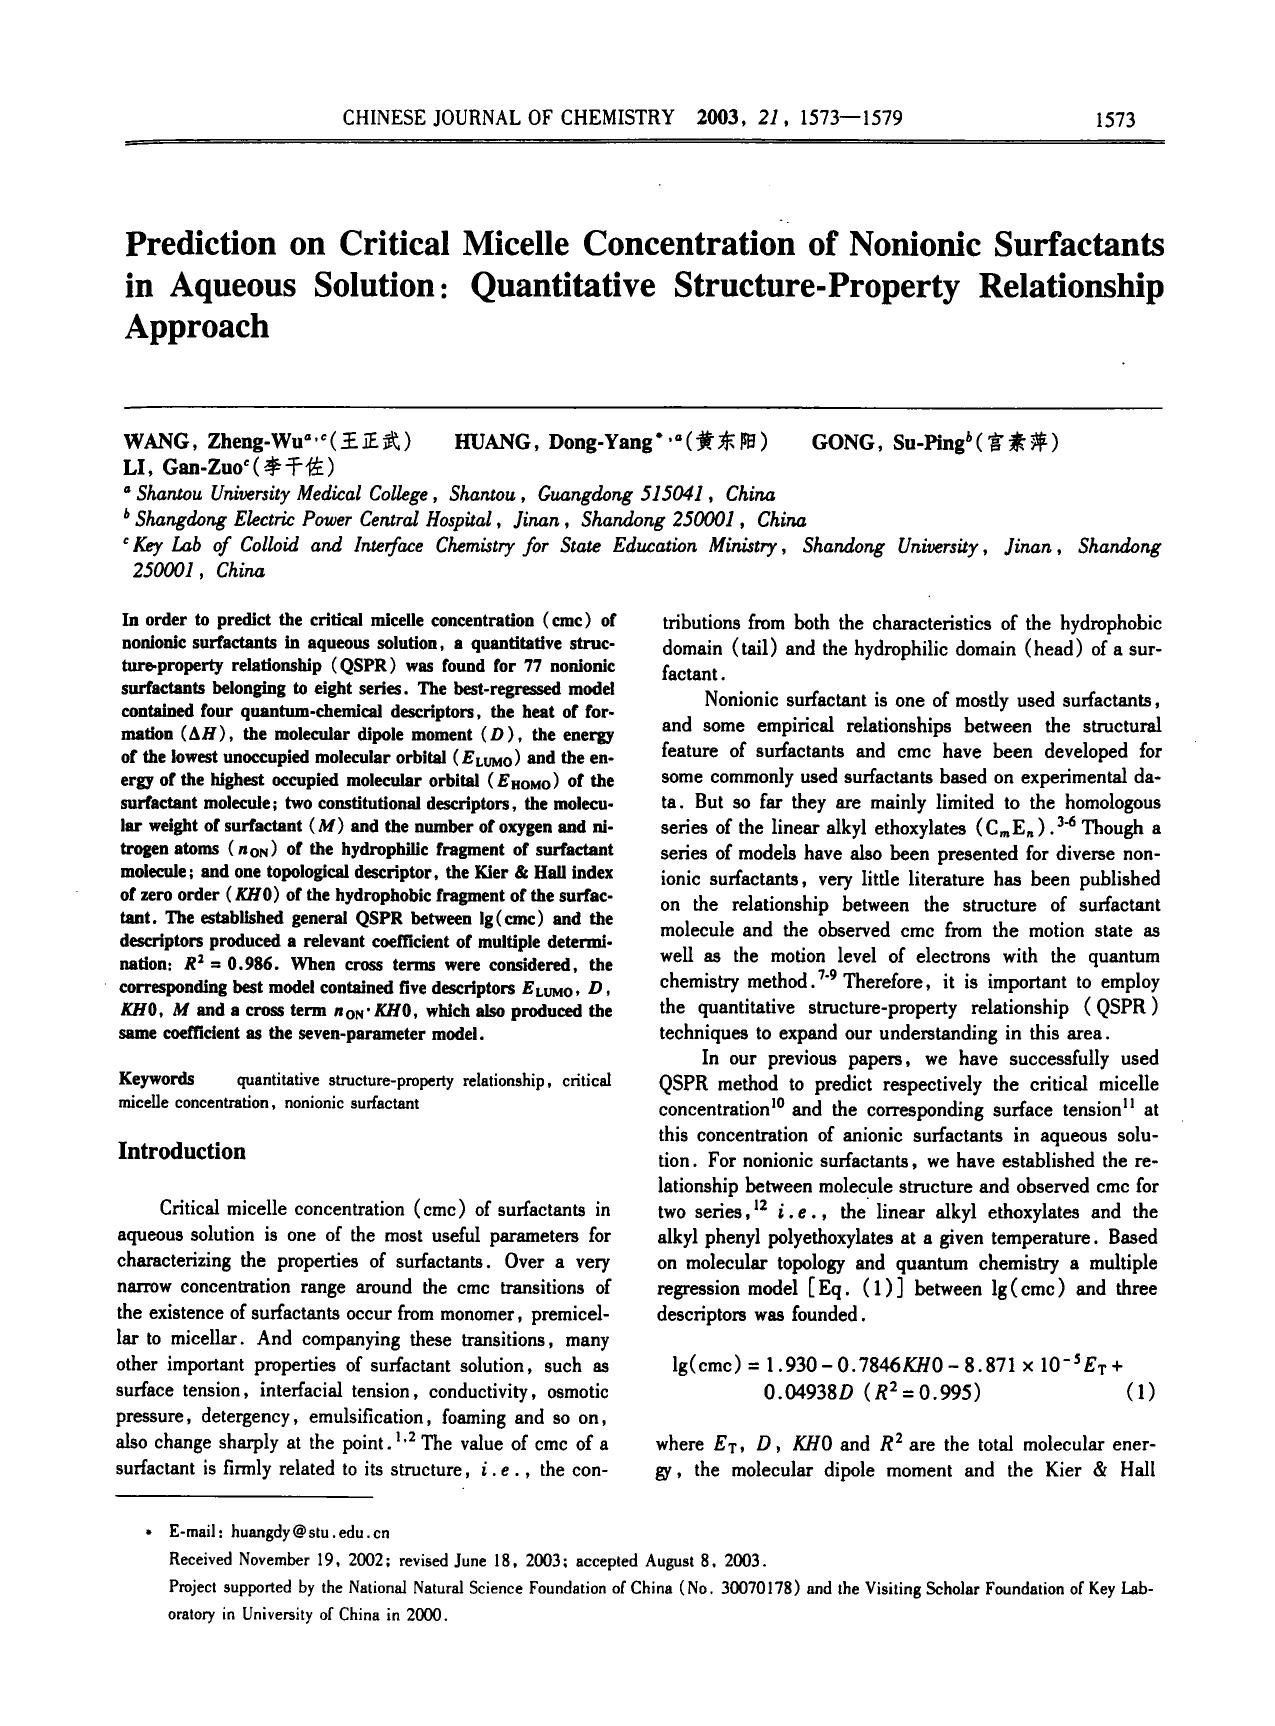 Prediction on Critical Micelle Concentration of Nonionic Surfactants in Aqueous Solution: Quantitative StructureProperty Relationship Approach by Unknown